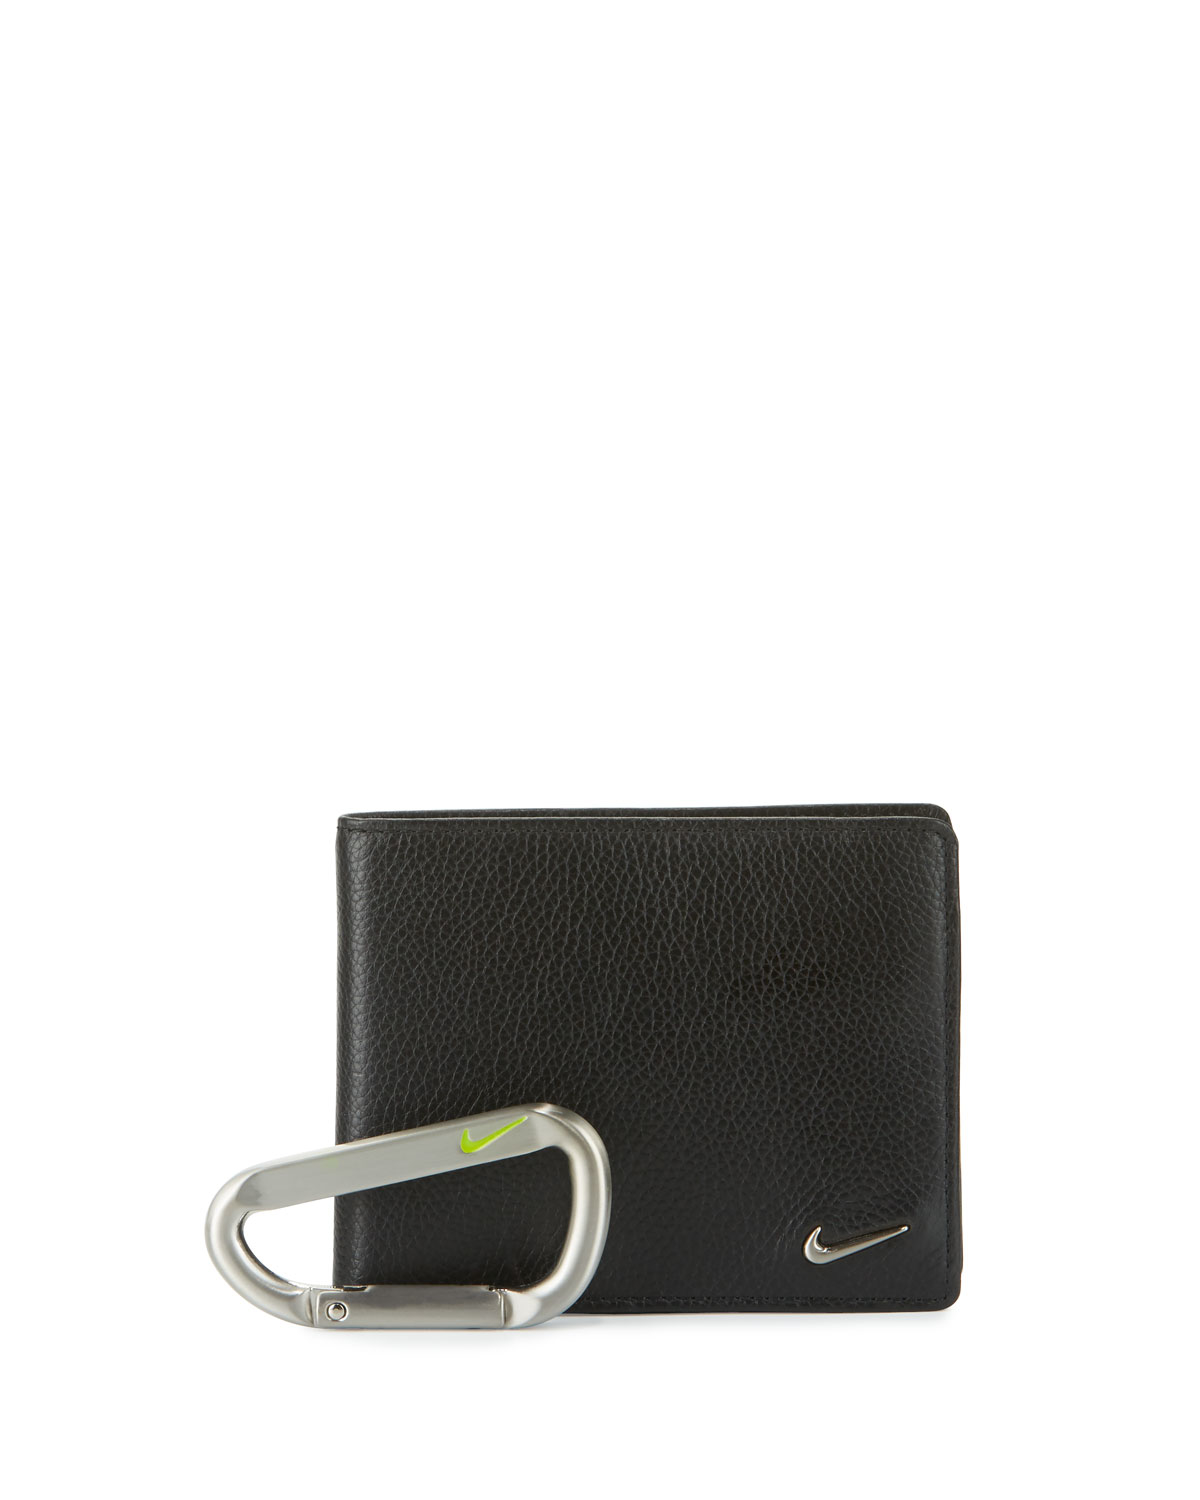 Nike Leather Wallet With Carabiner in Black for Men - Lyst